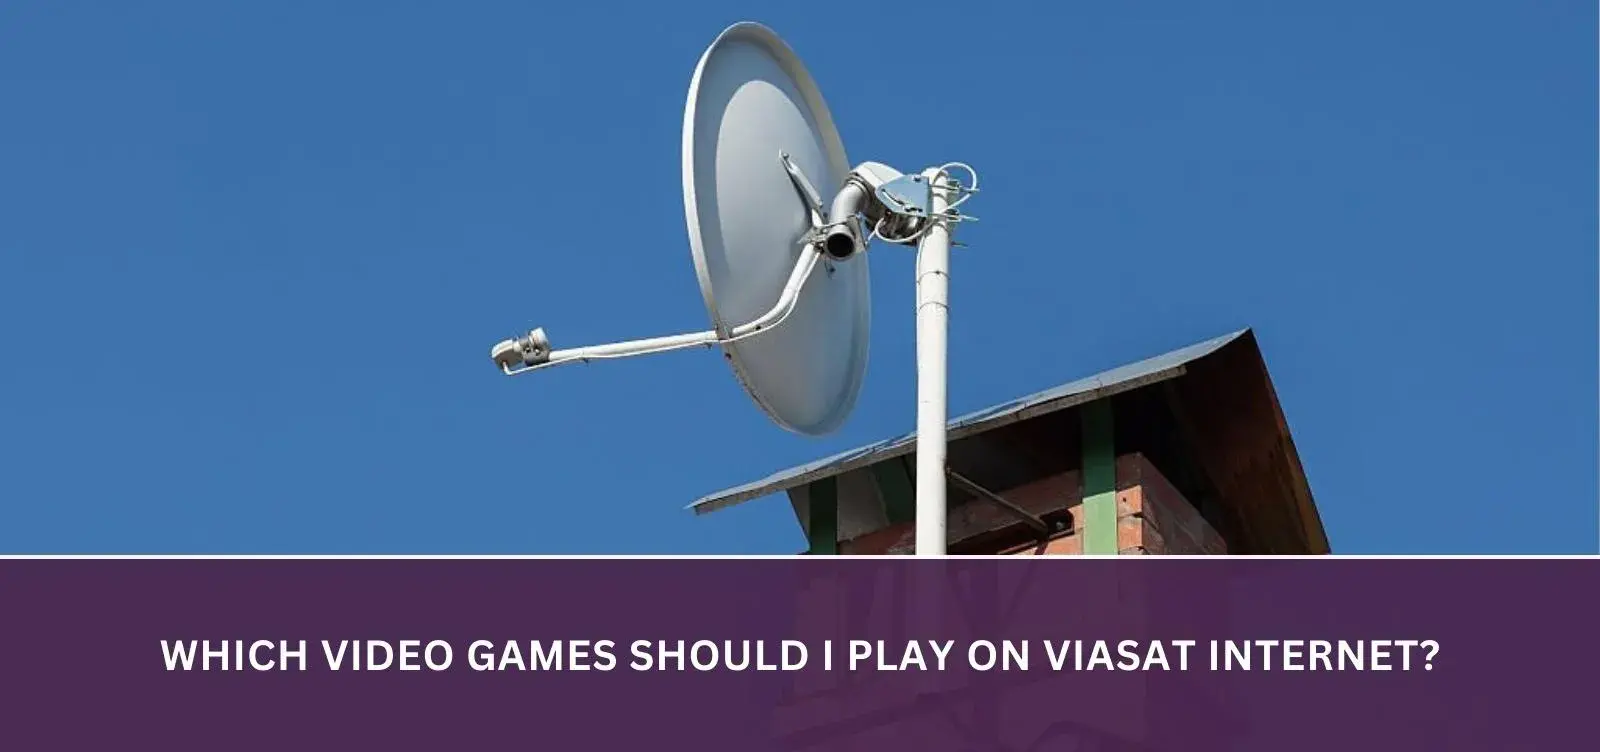 Which video games should I play on Viasat Internet?